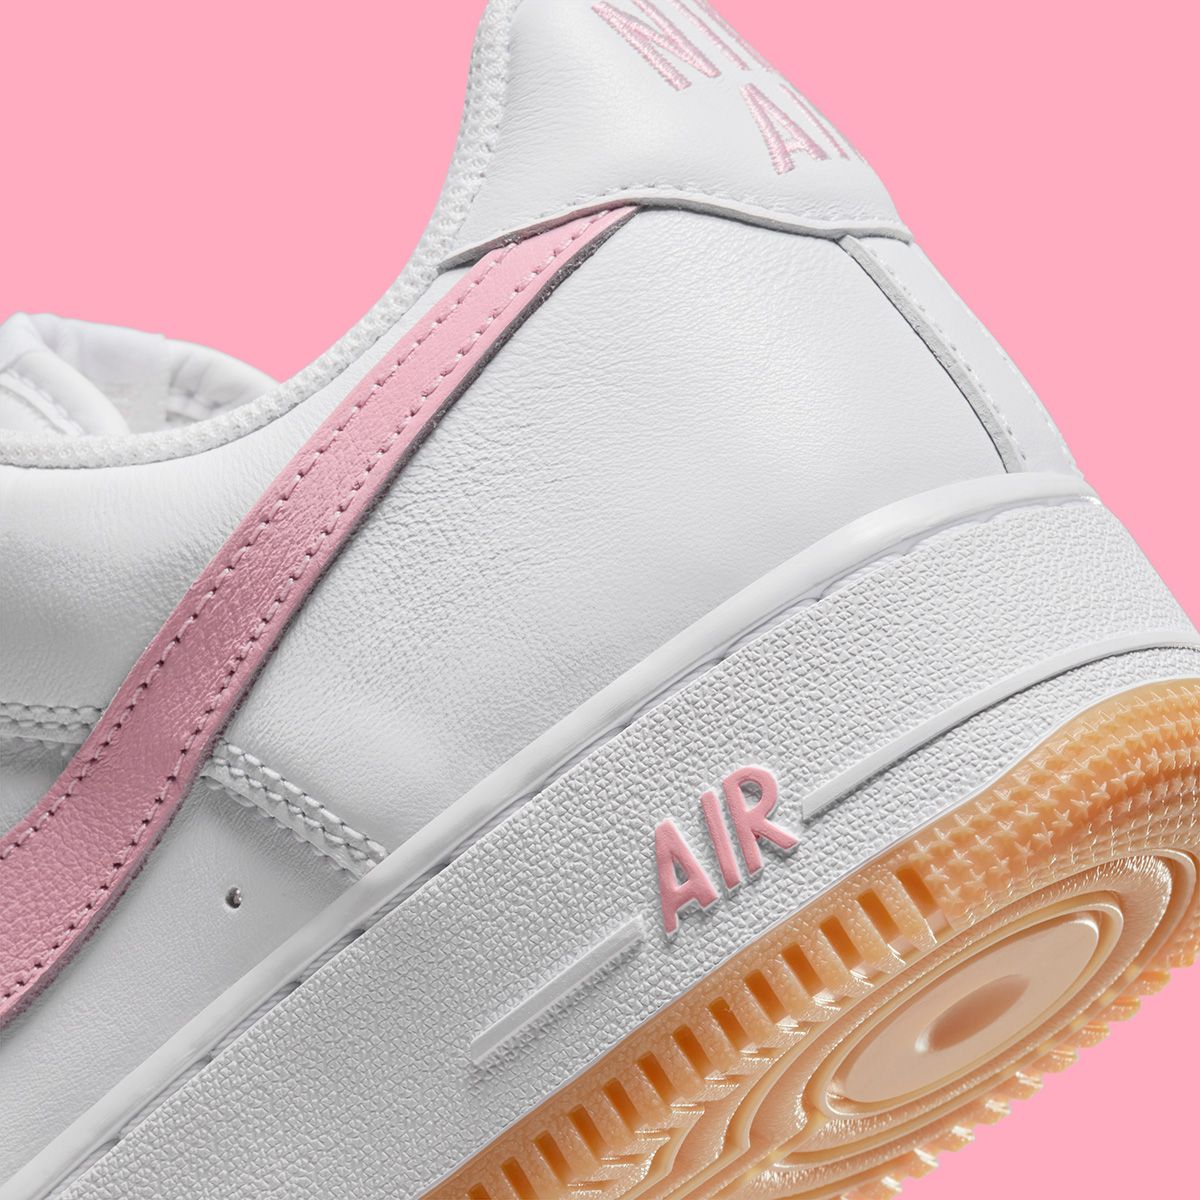 Nike's Since '82 Air Force 1 Goes Pink